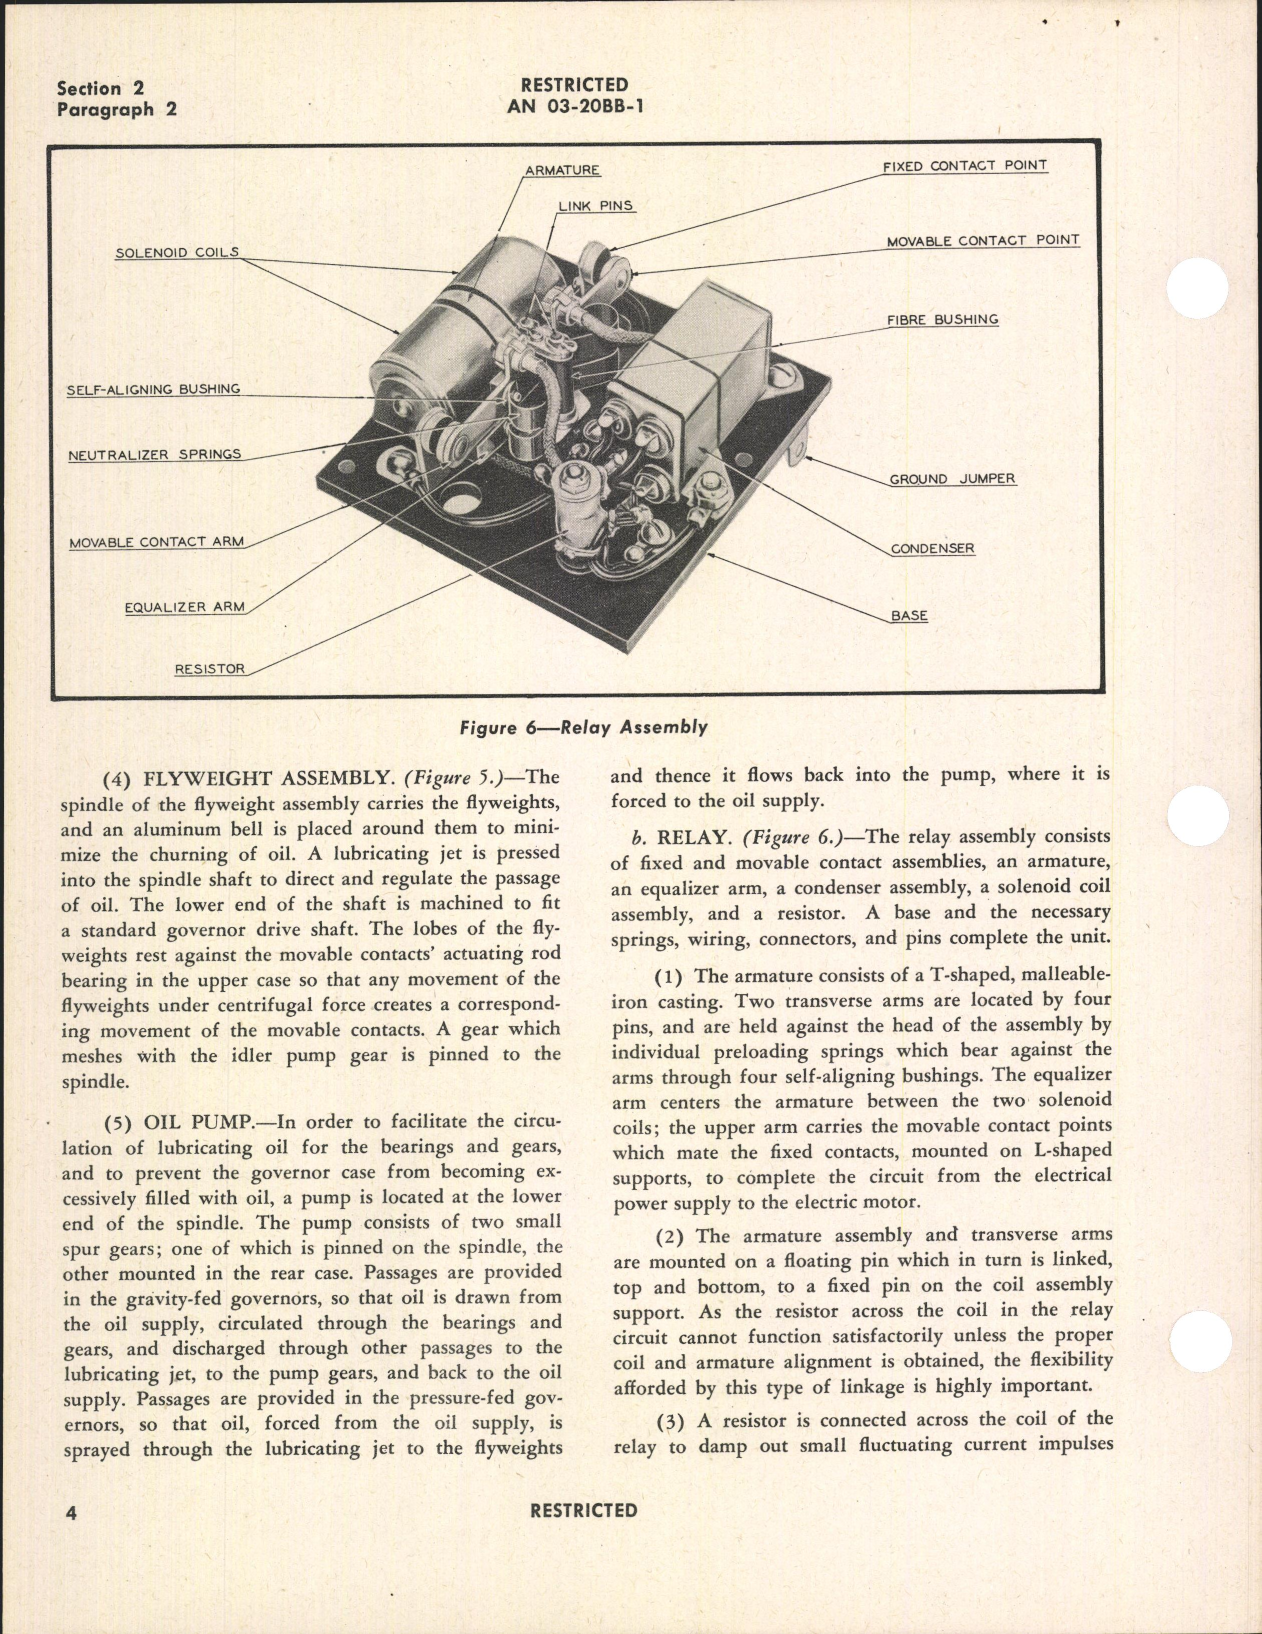 Sample page 8 from AirCorps Library document: Handbook of Instructions with Parts Catalog for Lubricated Pad Type Governor